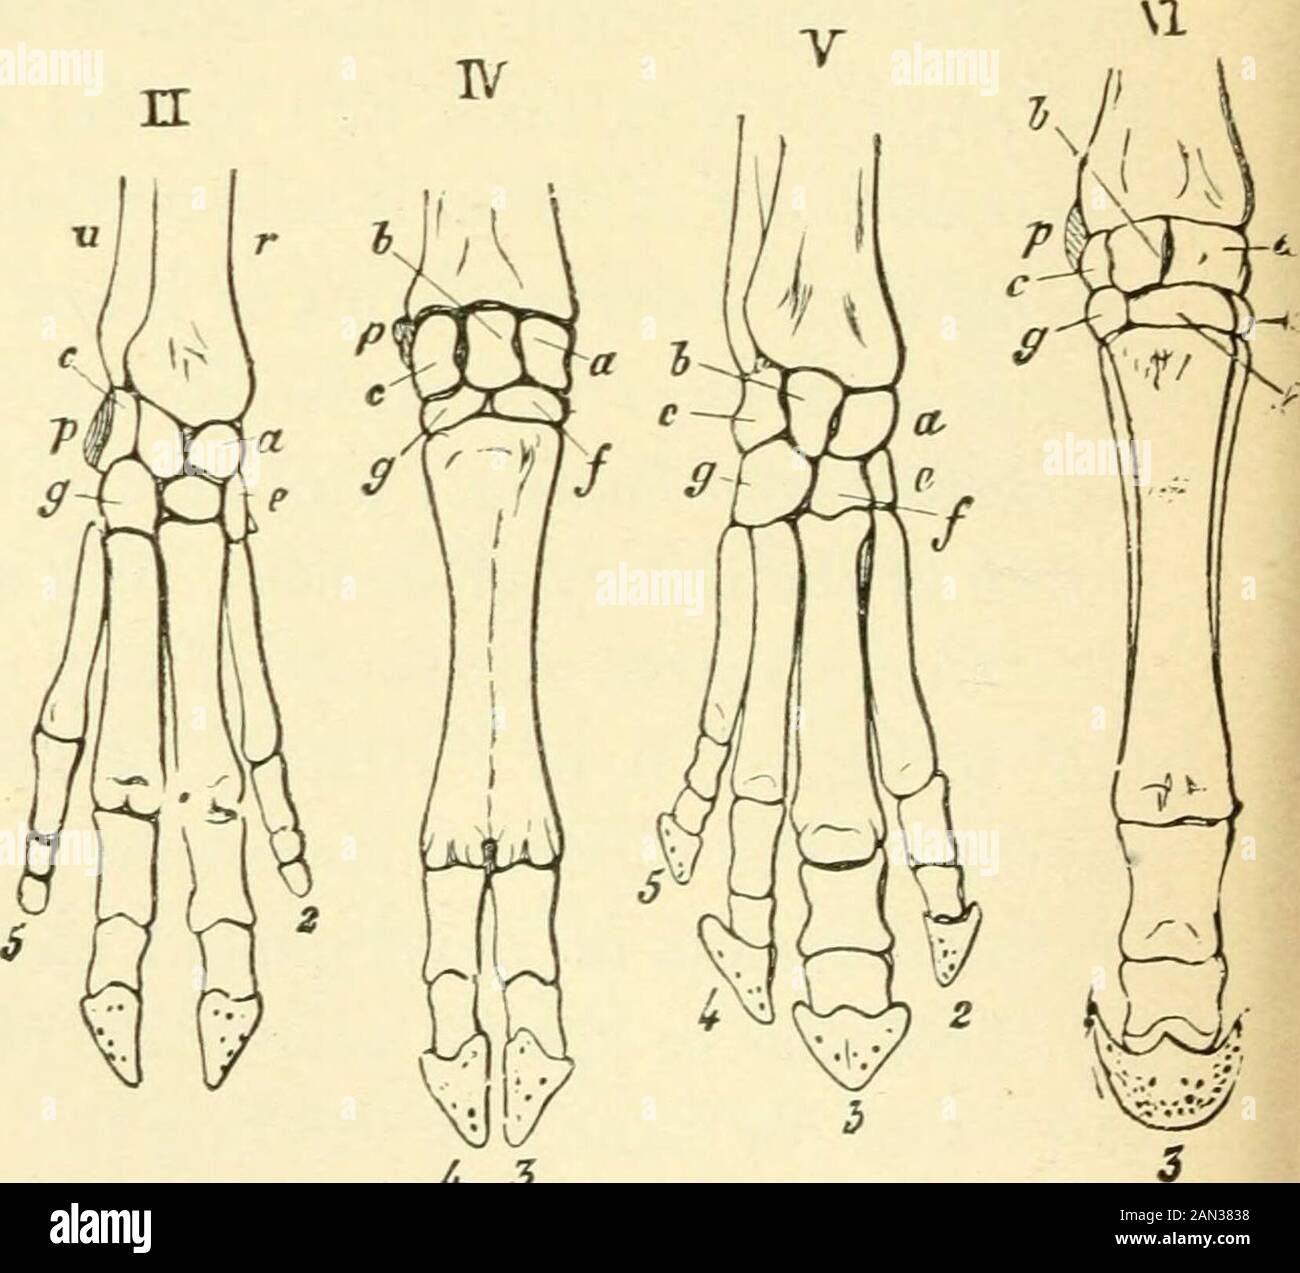 The evolution of man: a popular exposition of the principal points of human ontogeny and phylogenyFrom the German of Ernst Haeckel . 4- 5 Fig. 273.—Skeleton of hand or fore-foot of six Mammals. I. Man; II.Dog; III. Pig; IV. Ox; V. Tapir; VI. Horse, r, Eadius; u, ulna;a, scaphoid; h, semi-lunar; c, triquetrum (cuneiform); d, trapezium; gytrapezoid ; /, capitatnm (unciform process) ; g, hamatum (unciform bone) Jp, pisiform; 1, thumb; 2, digit; 3, middle finger; 4, ring finger; 5, littlefinger. (After Gegenbaur.) ORIGIN OF THE LIMBS. 307 Tol. i. p. 362; / fore-leg, b, hinrl-leg.) In all, the firs Stock Photo